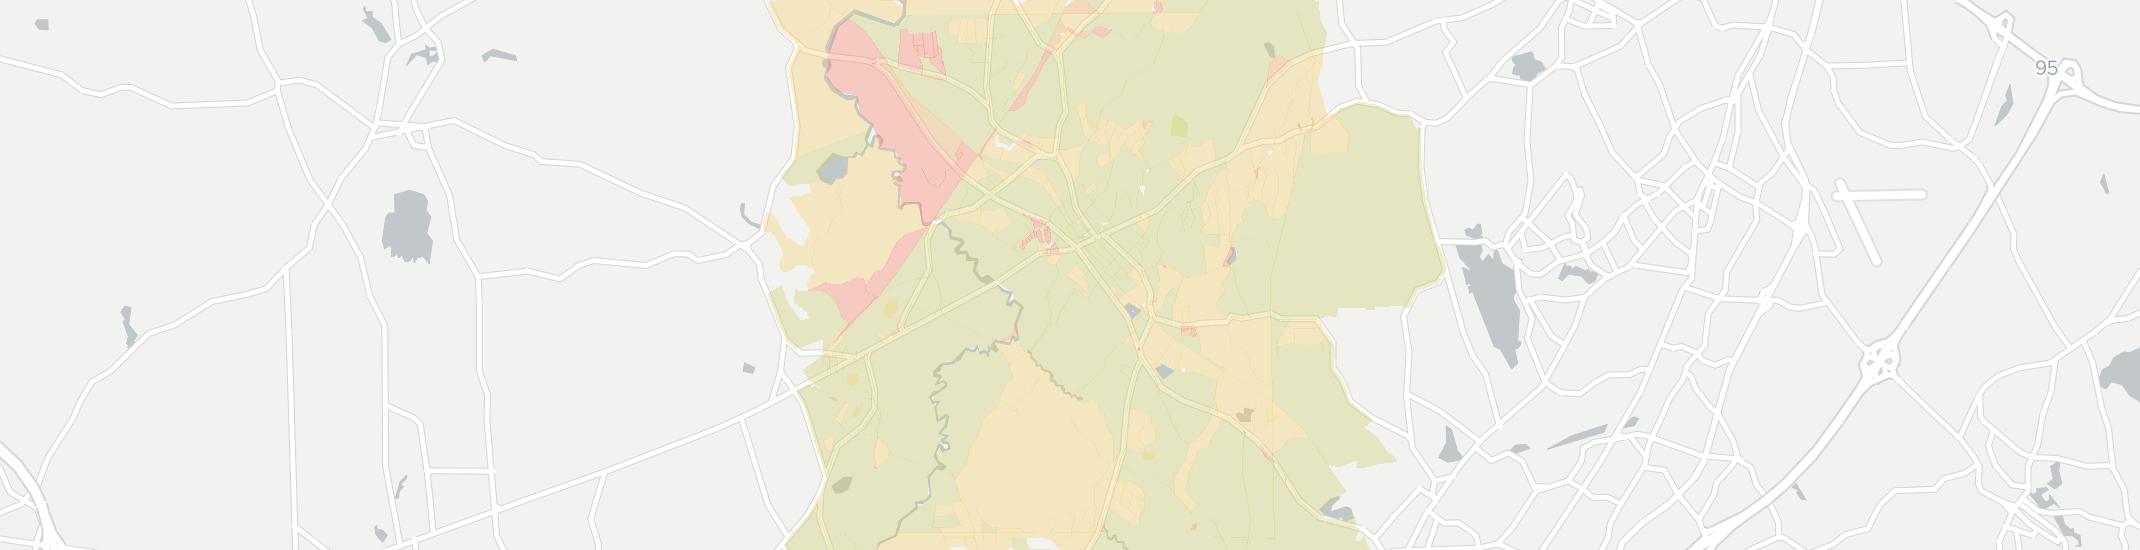 Medfield Internet Competition Map. Click for interactive map